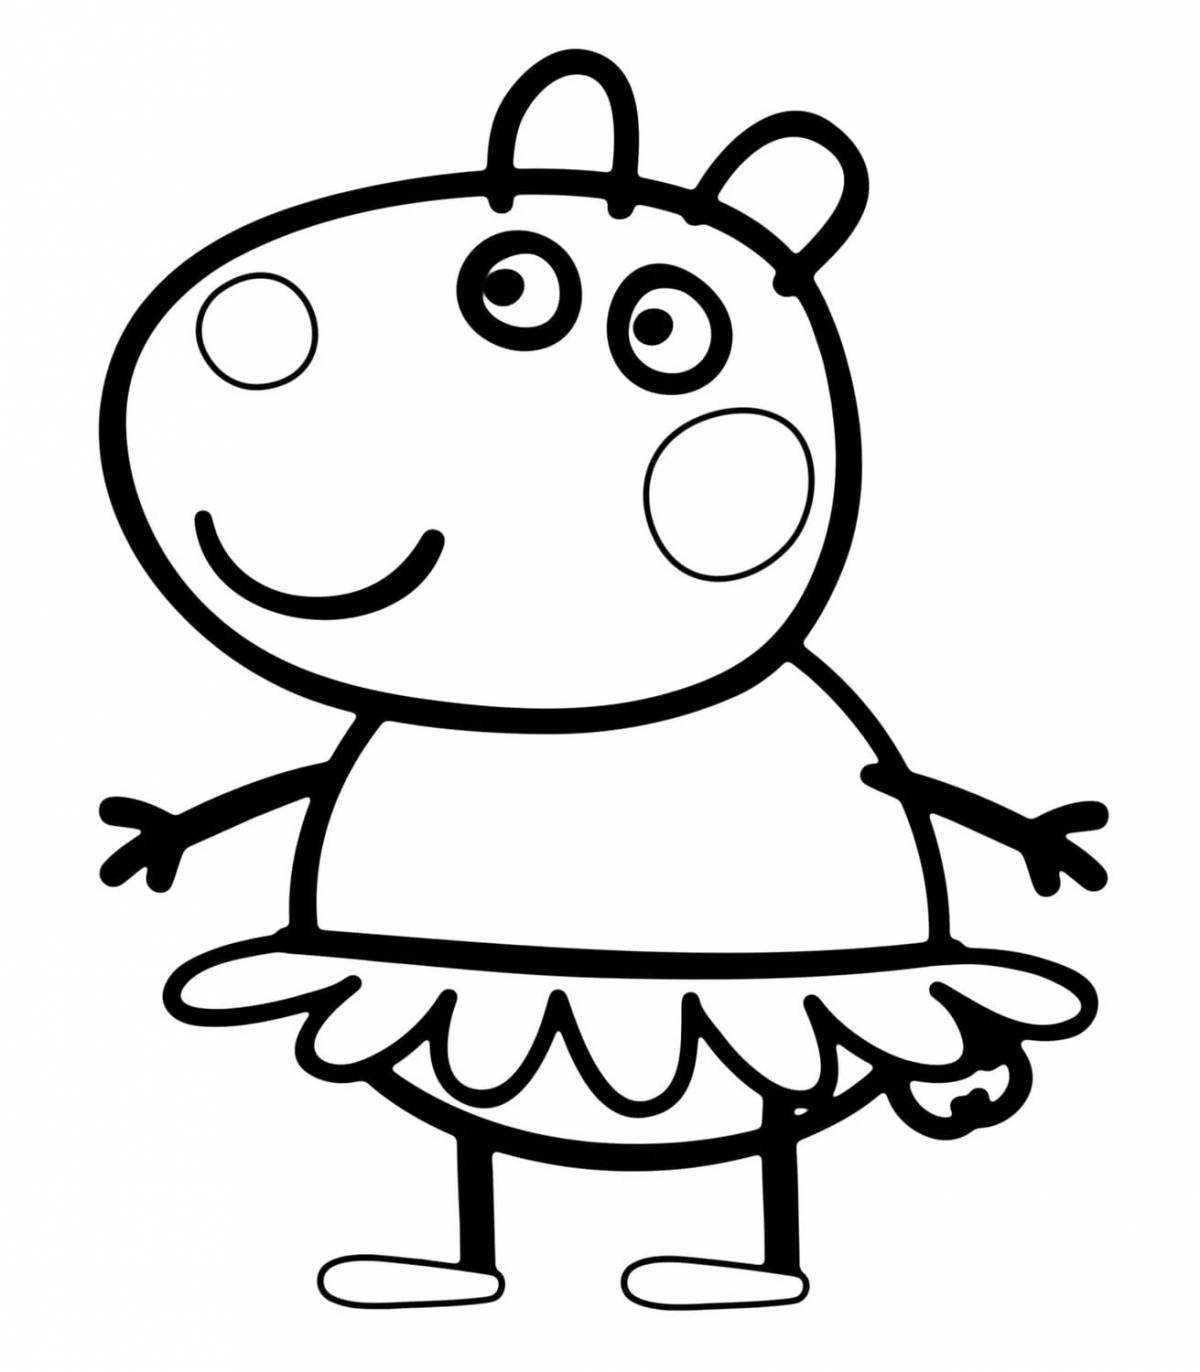 Playful peppa pig coloring page for kids